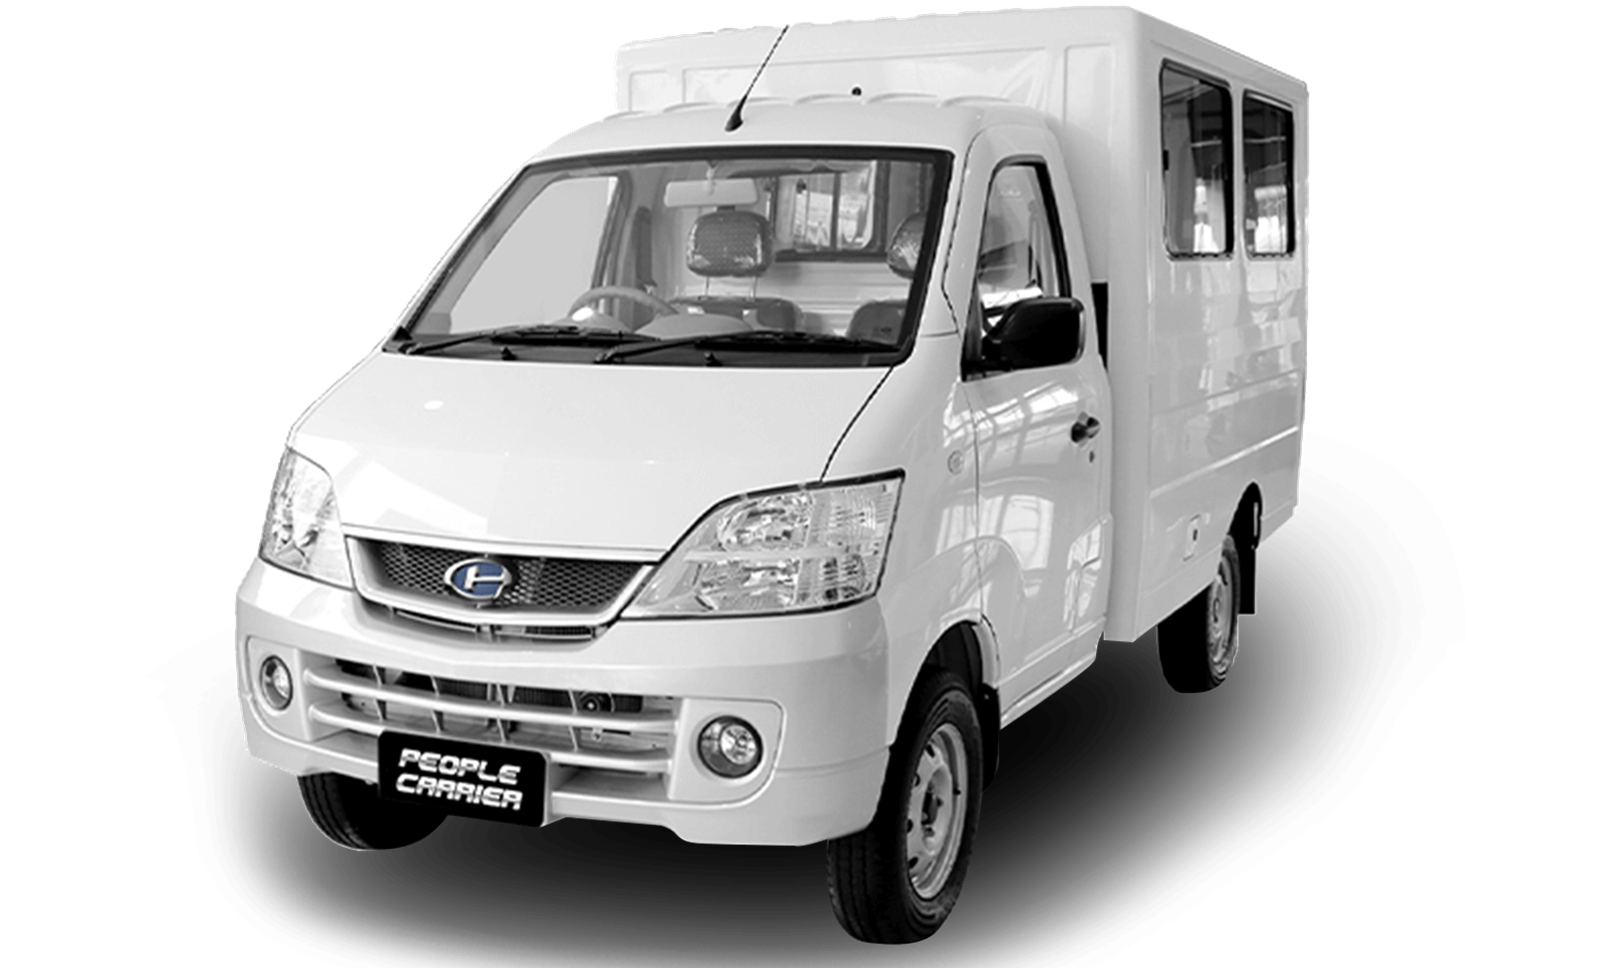 Changhe Freedom People Carrier White